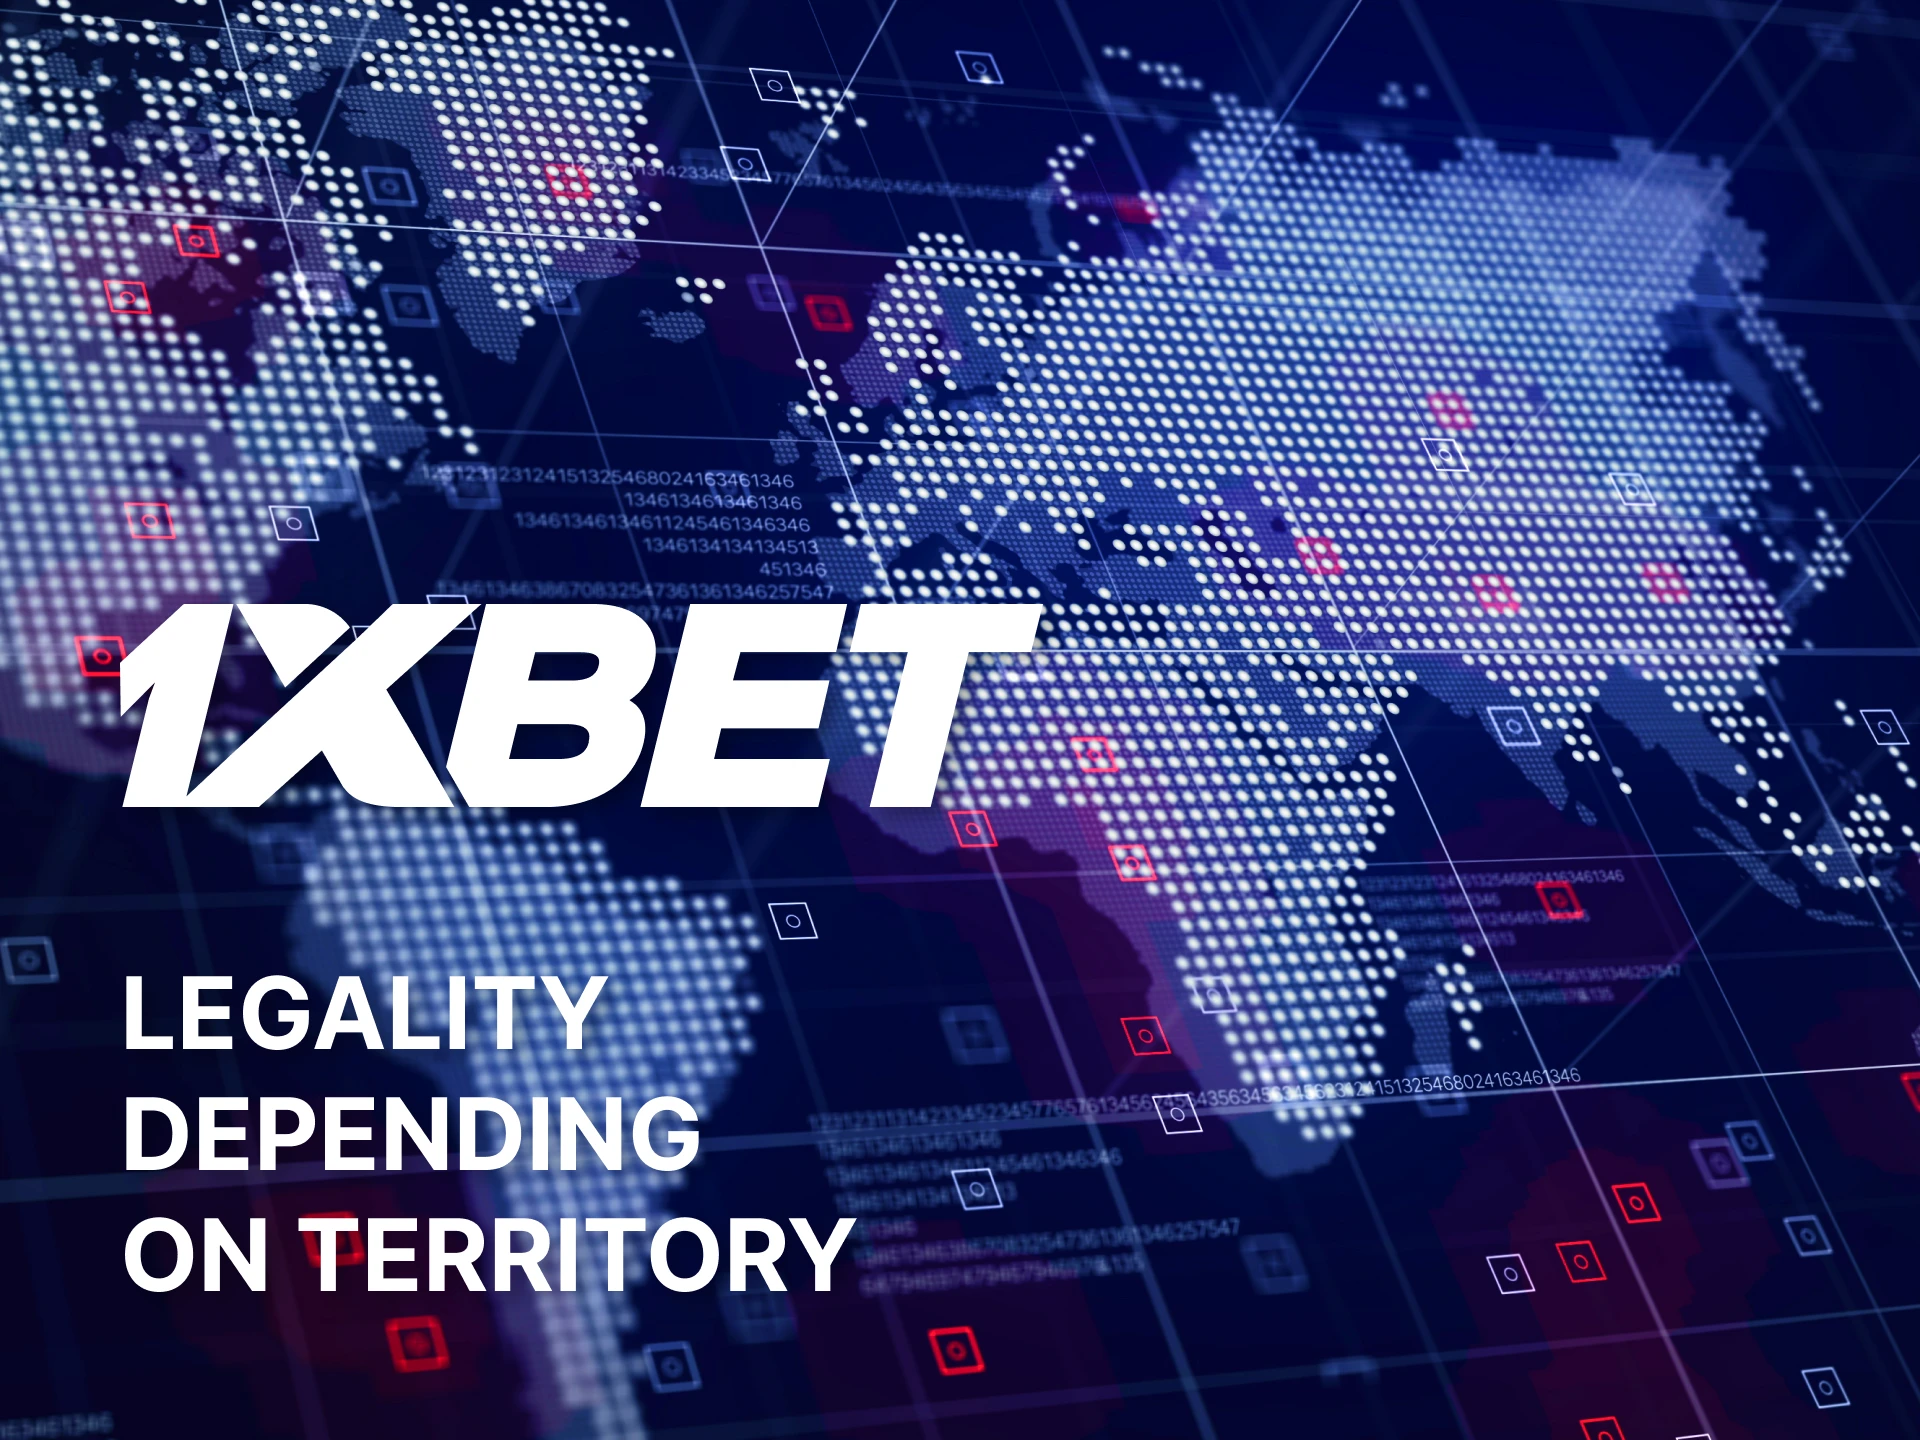 1xBet may be available depending on the territory where you are trying to access the site.